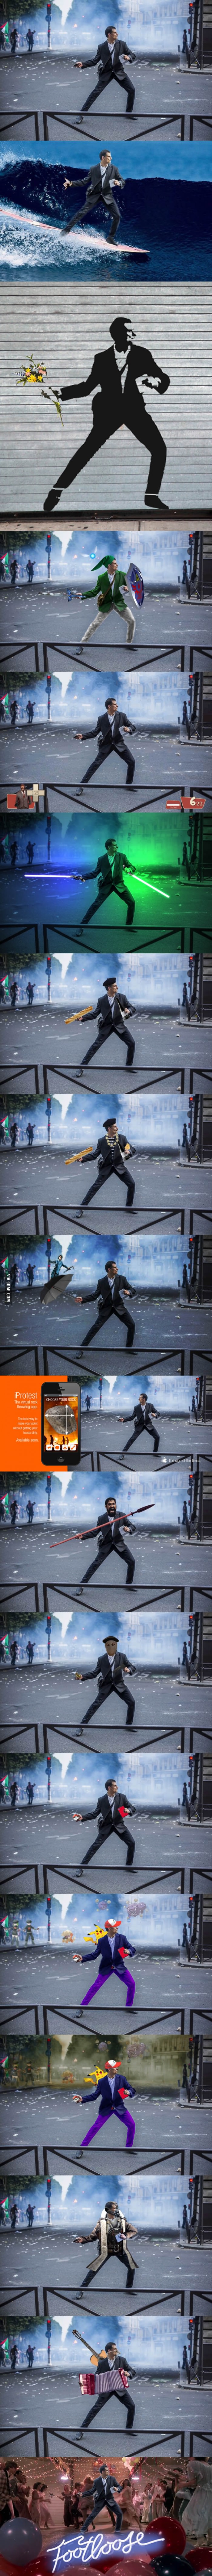 this french protestor in a suit gets the photoshop treatment, lol